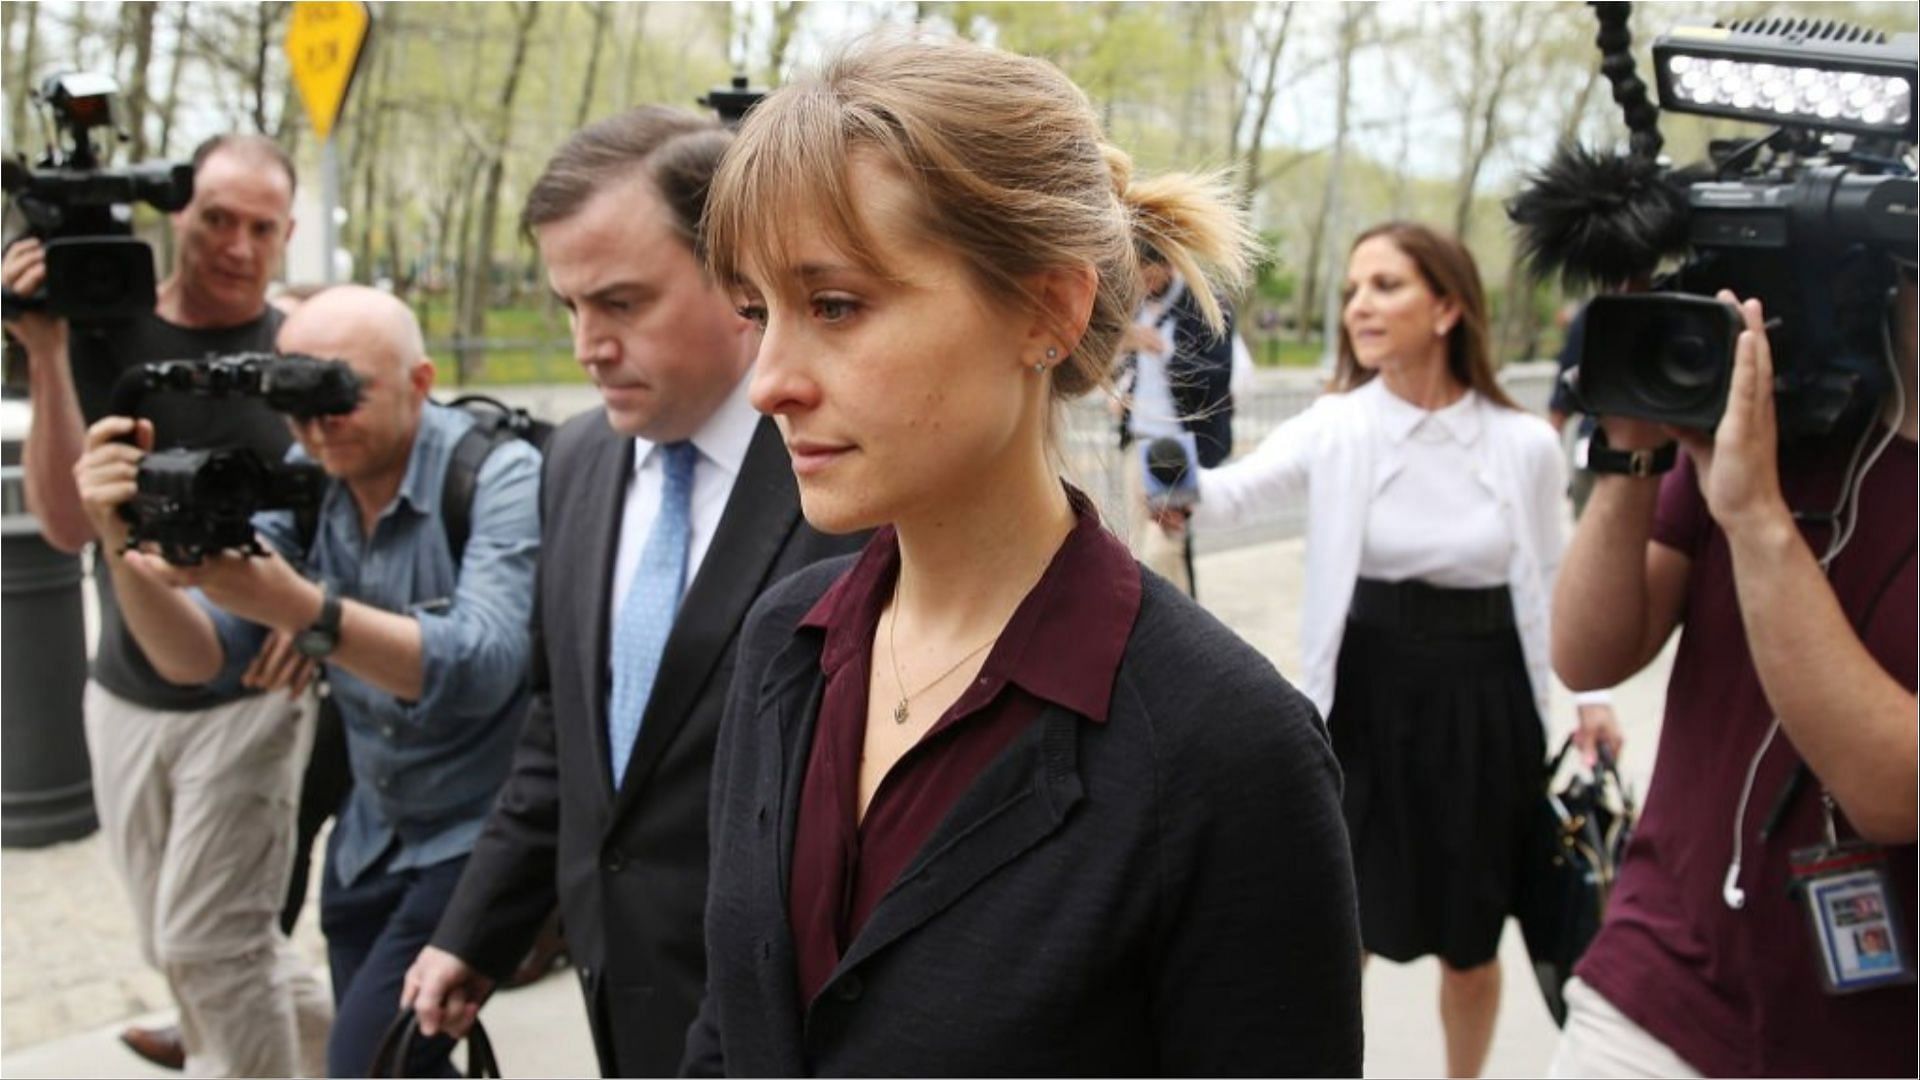 Allison Mack has been released from prison after completing her sentence of three years (Image via Jemal Countess/Getty Images)